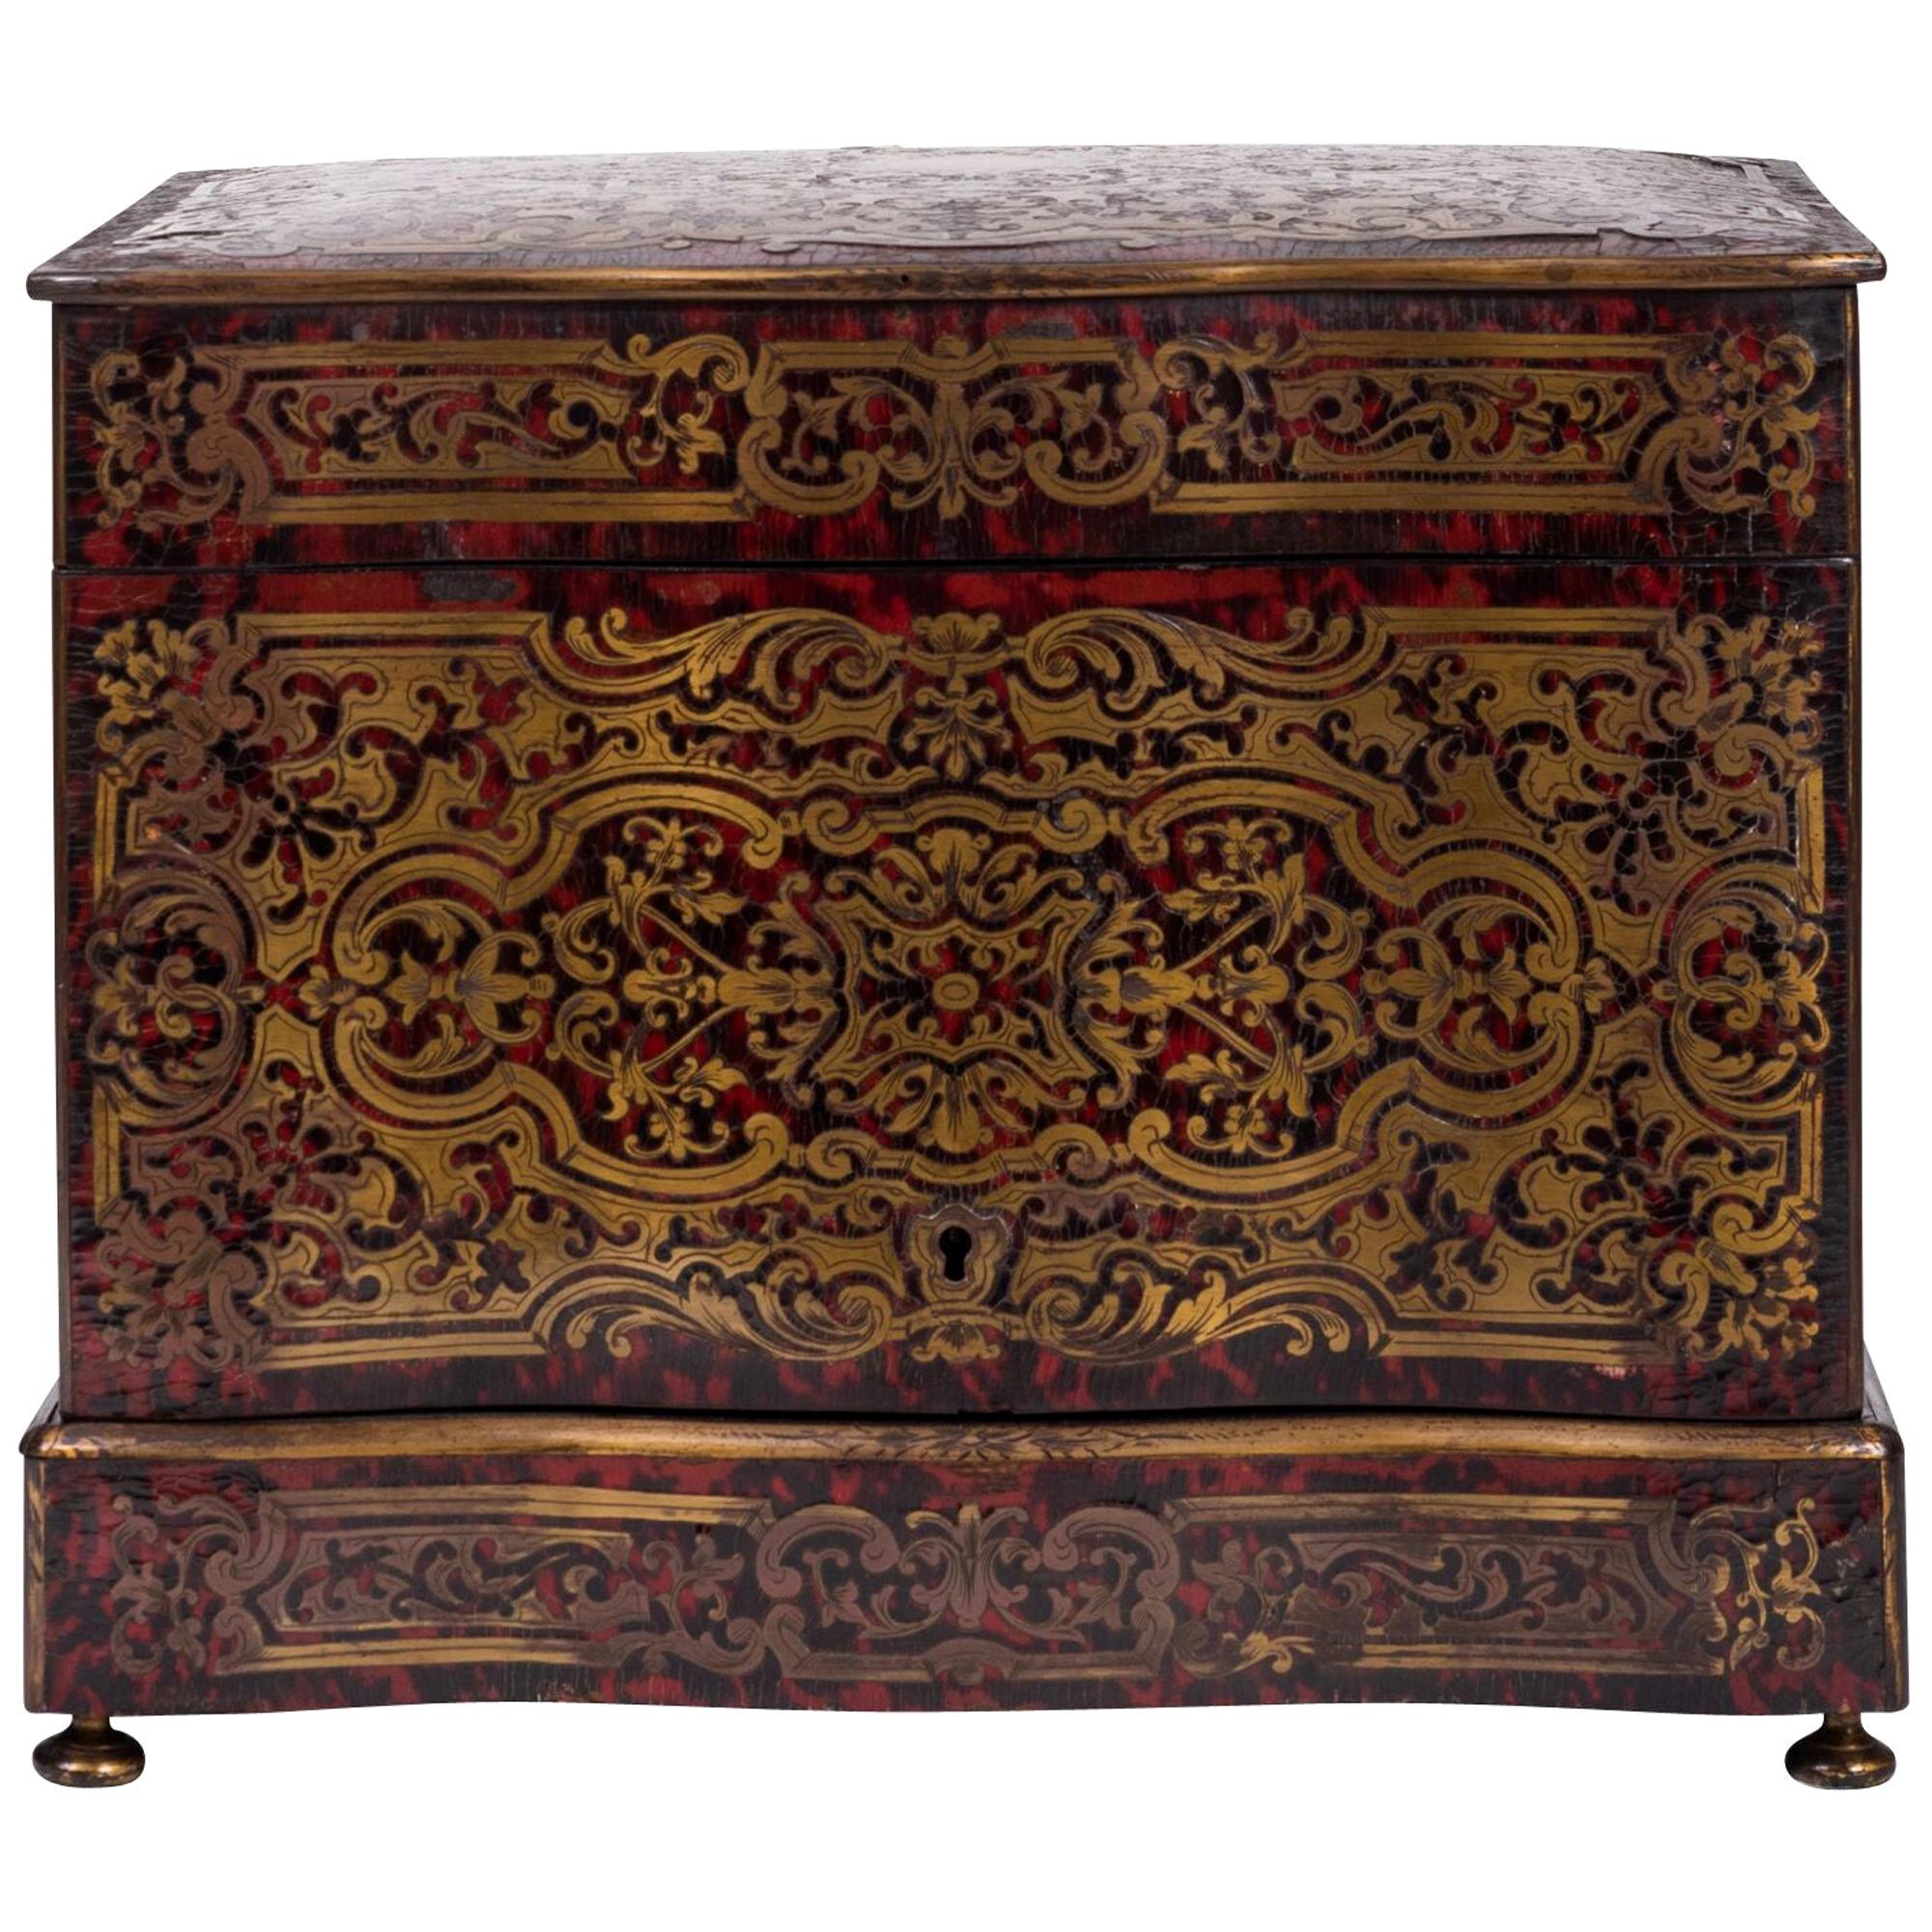 French Louis XIV Style Tortoiseshell Marquetry Liquor Casket For Sale